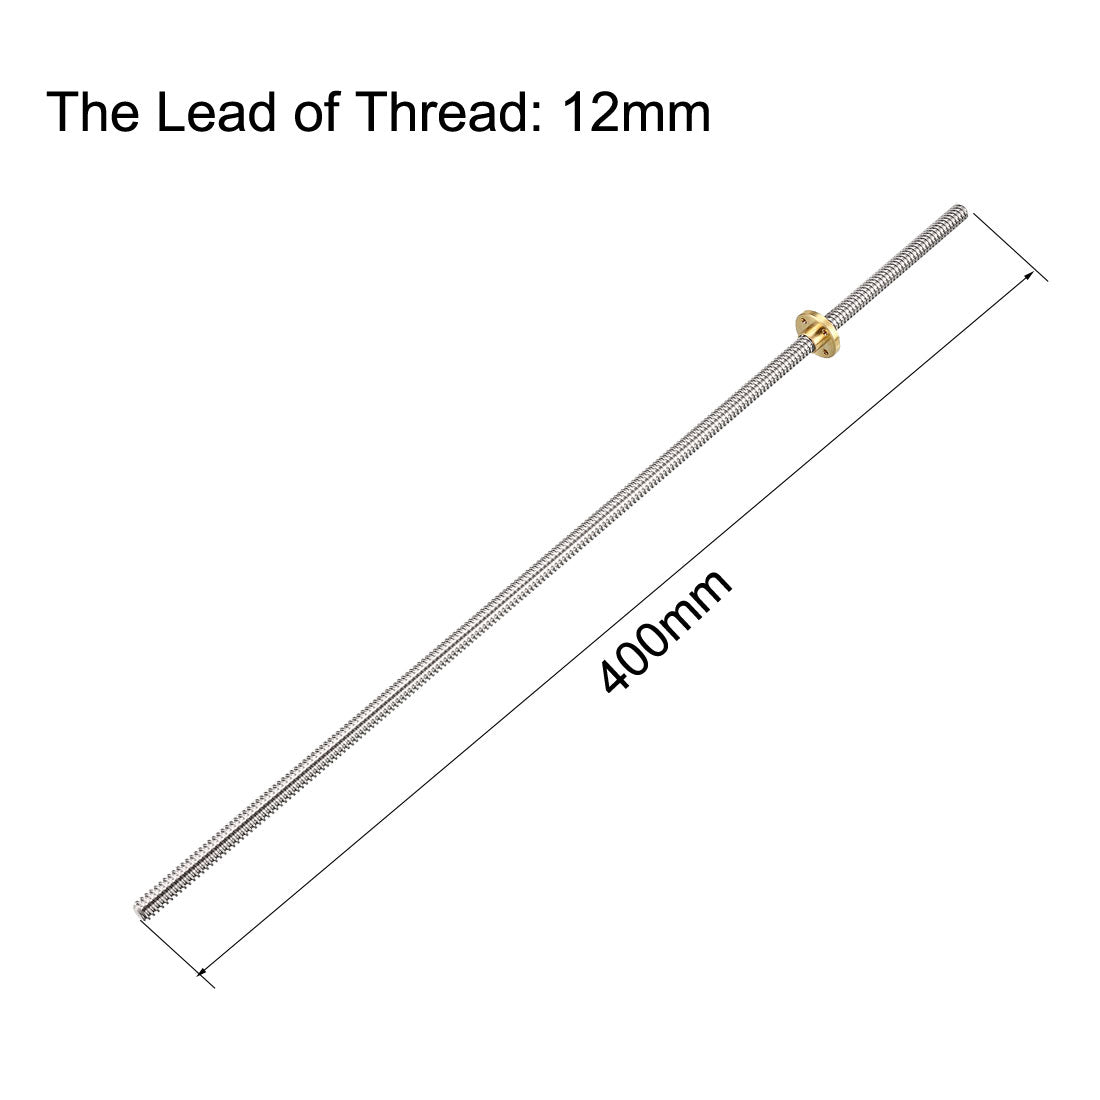 uxcell Uxcell 400mm T8 Pitch 2mm Lead 12mm Lead Screw Rod with Copper Nut for 3D Printer